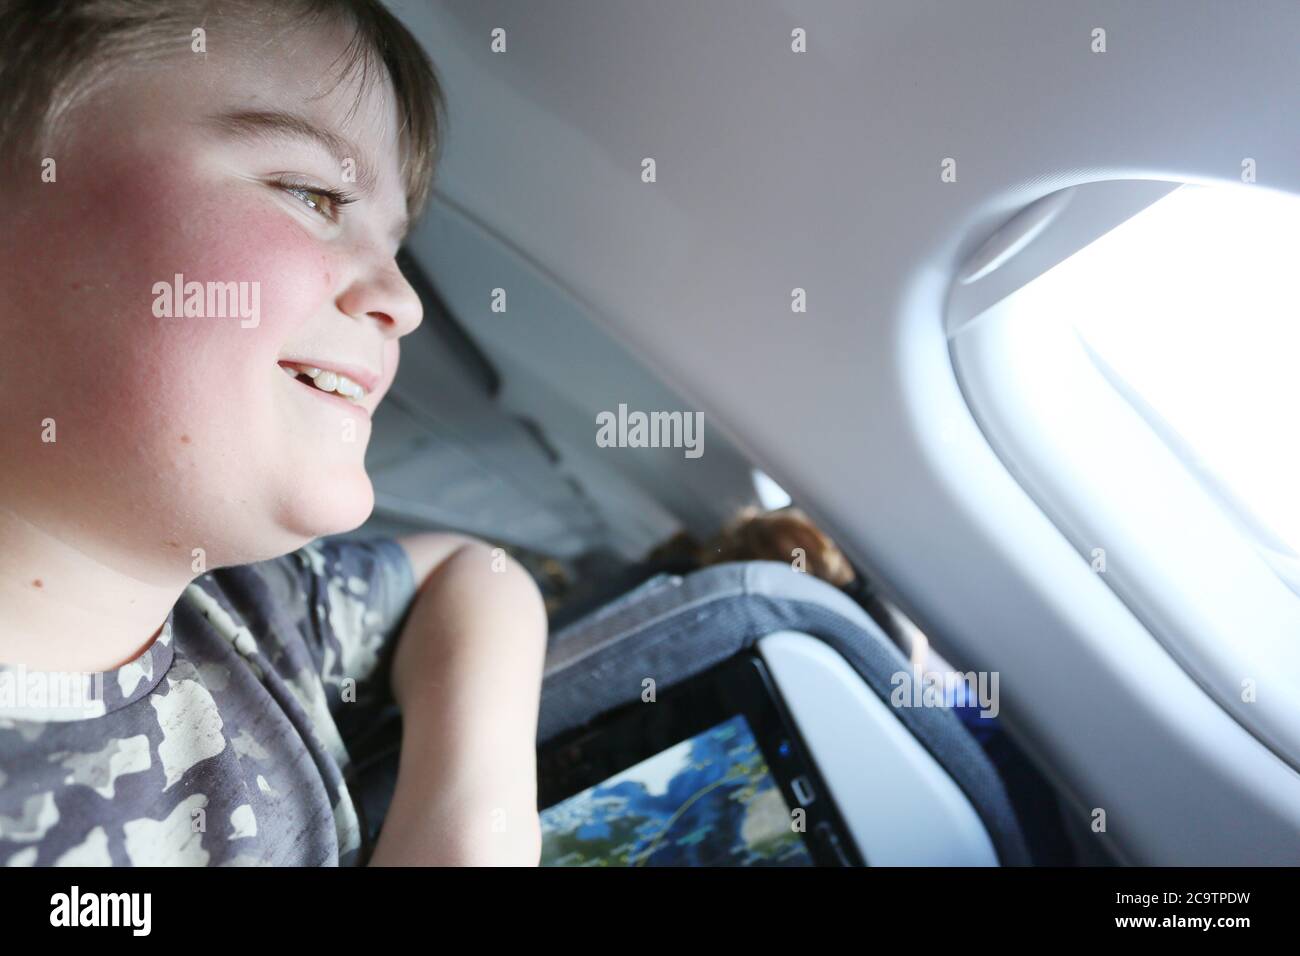 boy on a plane to mexico looking out of the aircraft portal window Stock Photo